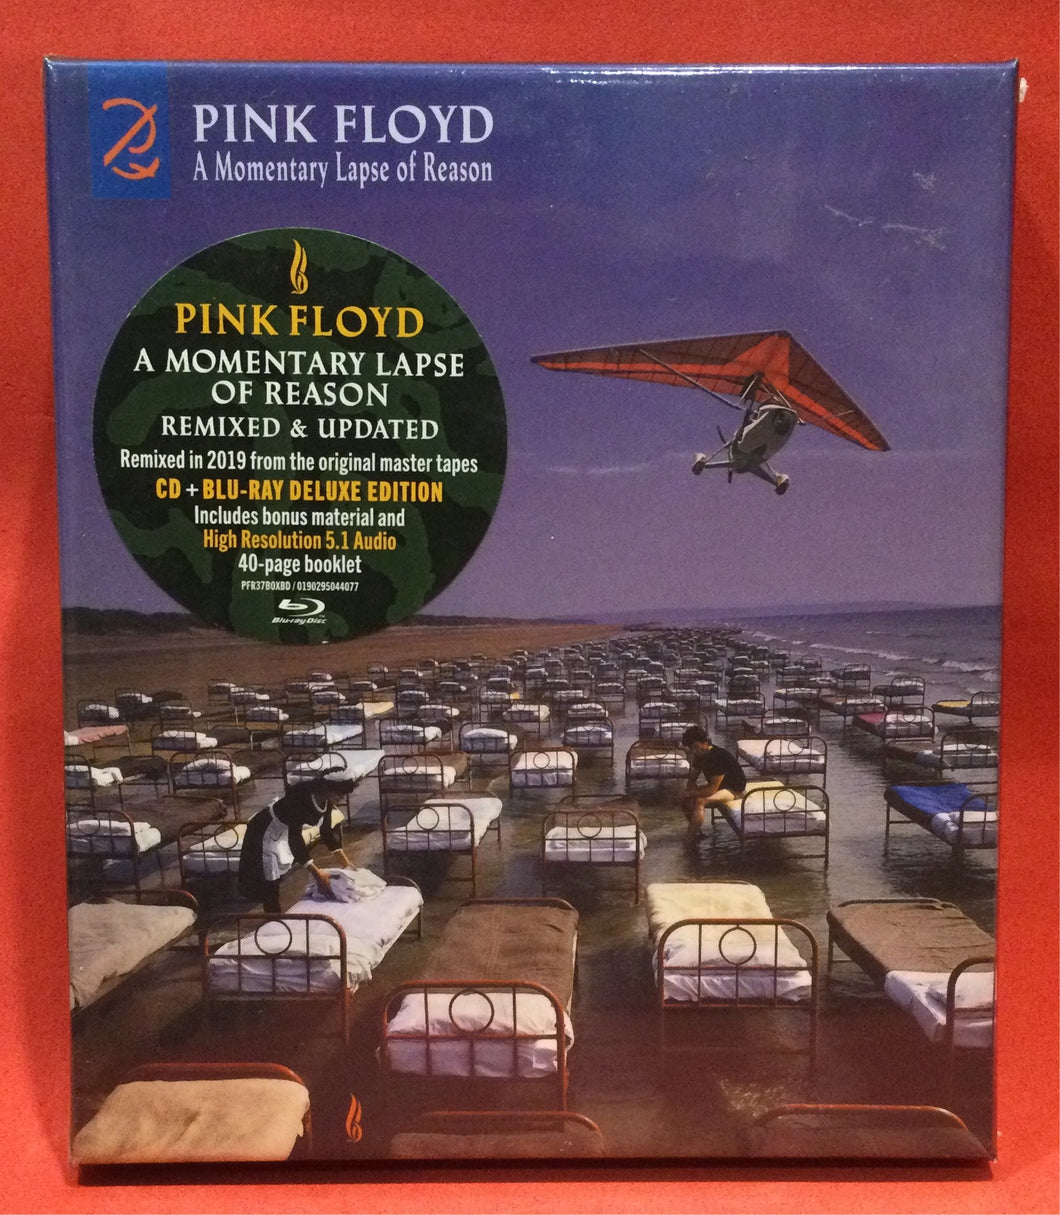 PINK FLOYD - A MOMENTARY LAPSE IN REASON - CD + BLU-RAY (SEALED)